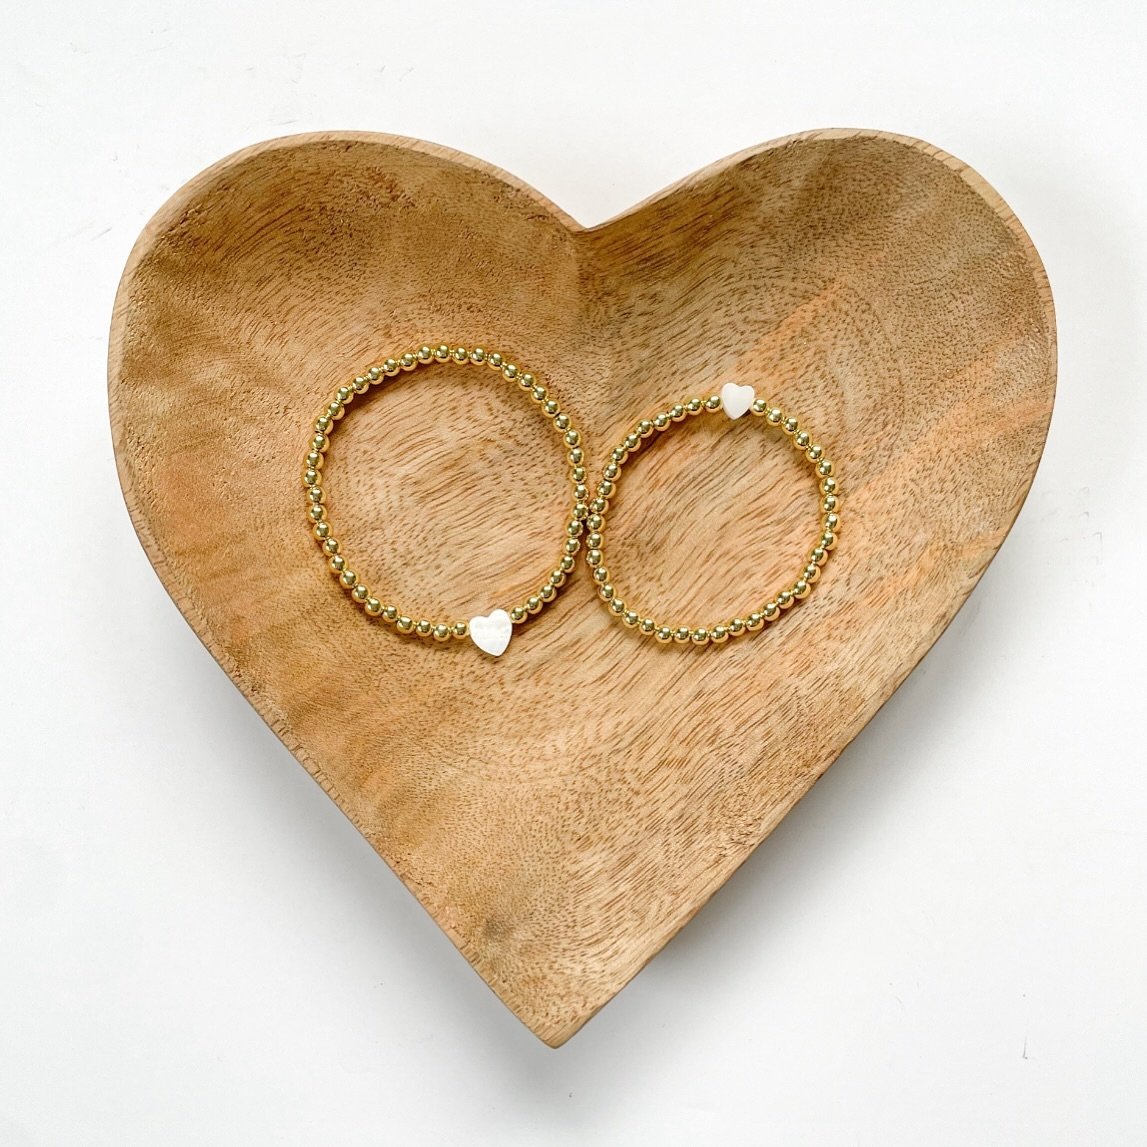 Celebrate Mother&rsquo;s Day in style with our beautiful Big Heart Art Emery bracelets, lovingly crafted by an 11-year-old entrepreneur. Adorned with 18k gold-filled beads and a delicate mother of pearl heart, these bracelets are a heartfelt symbol o